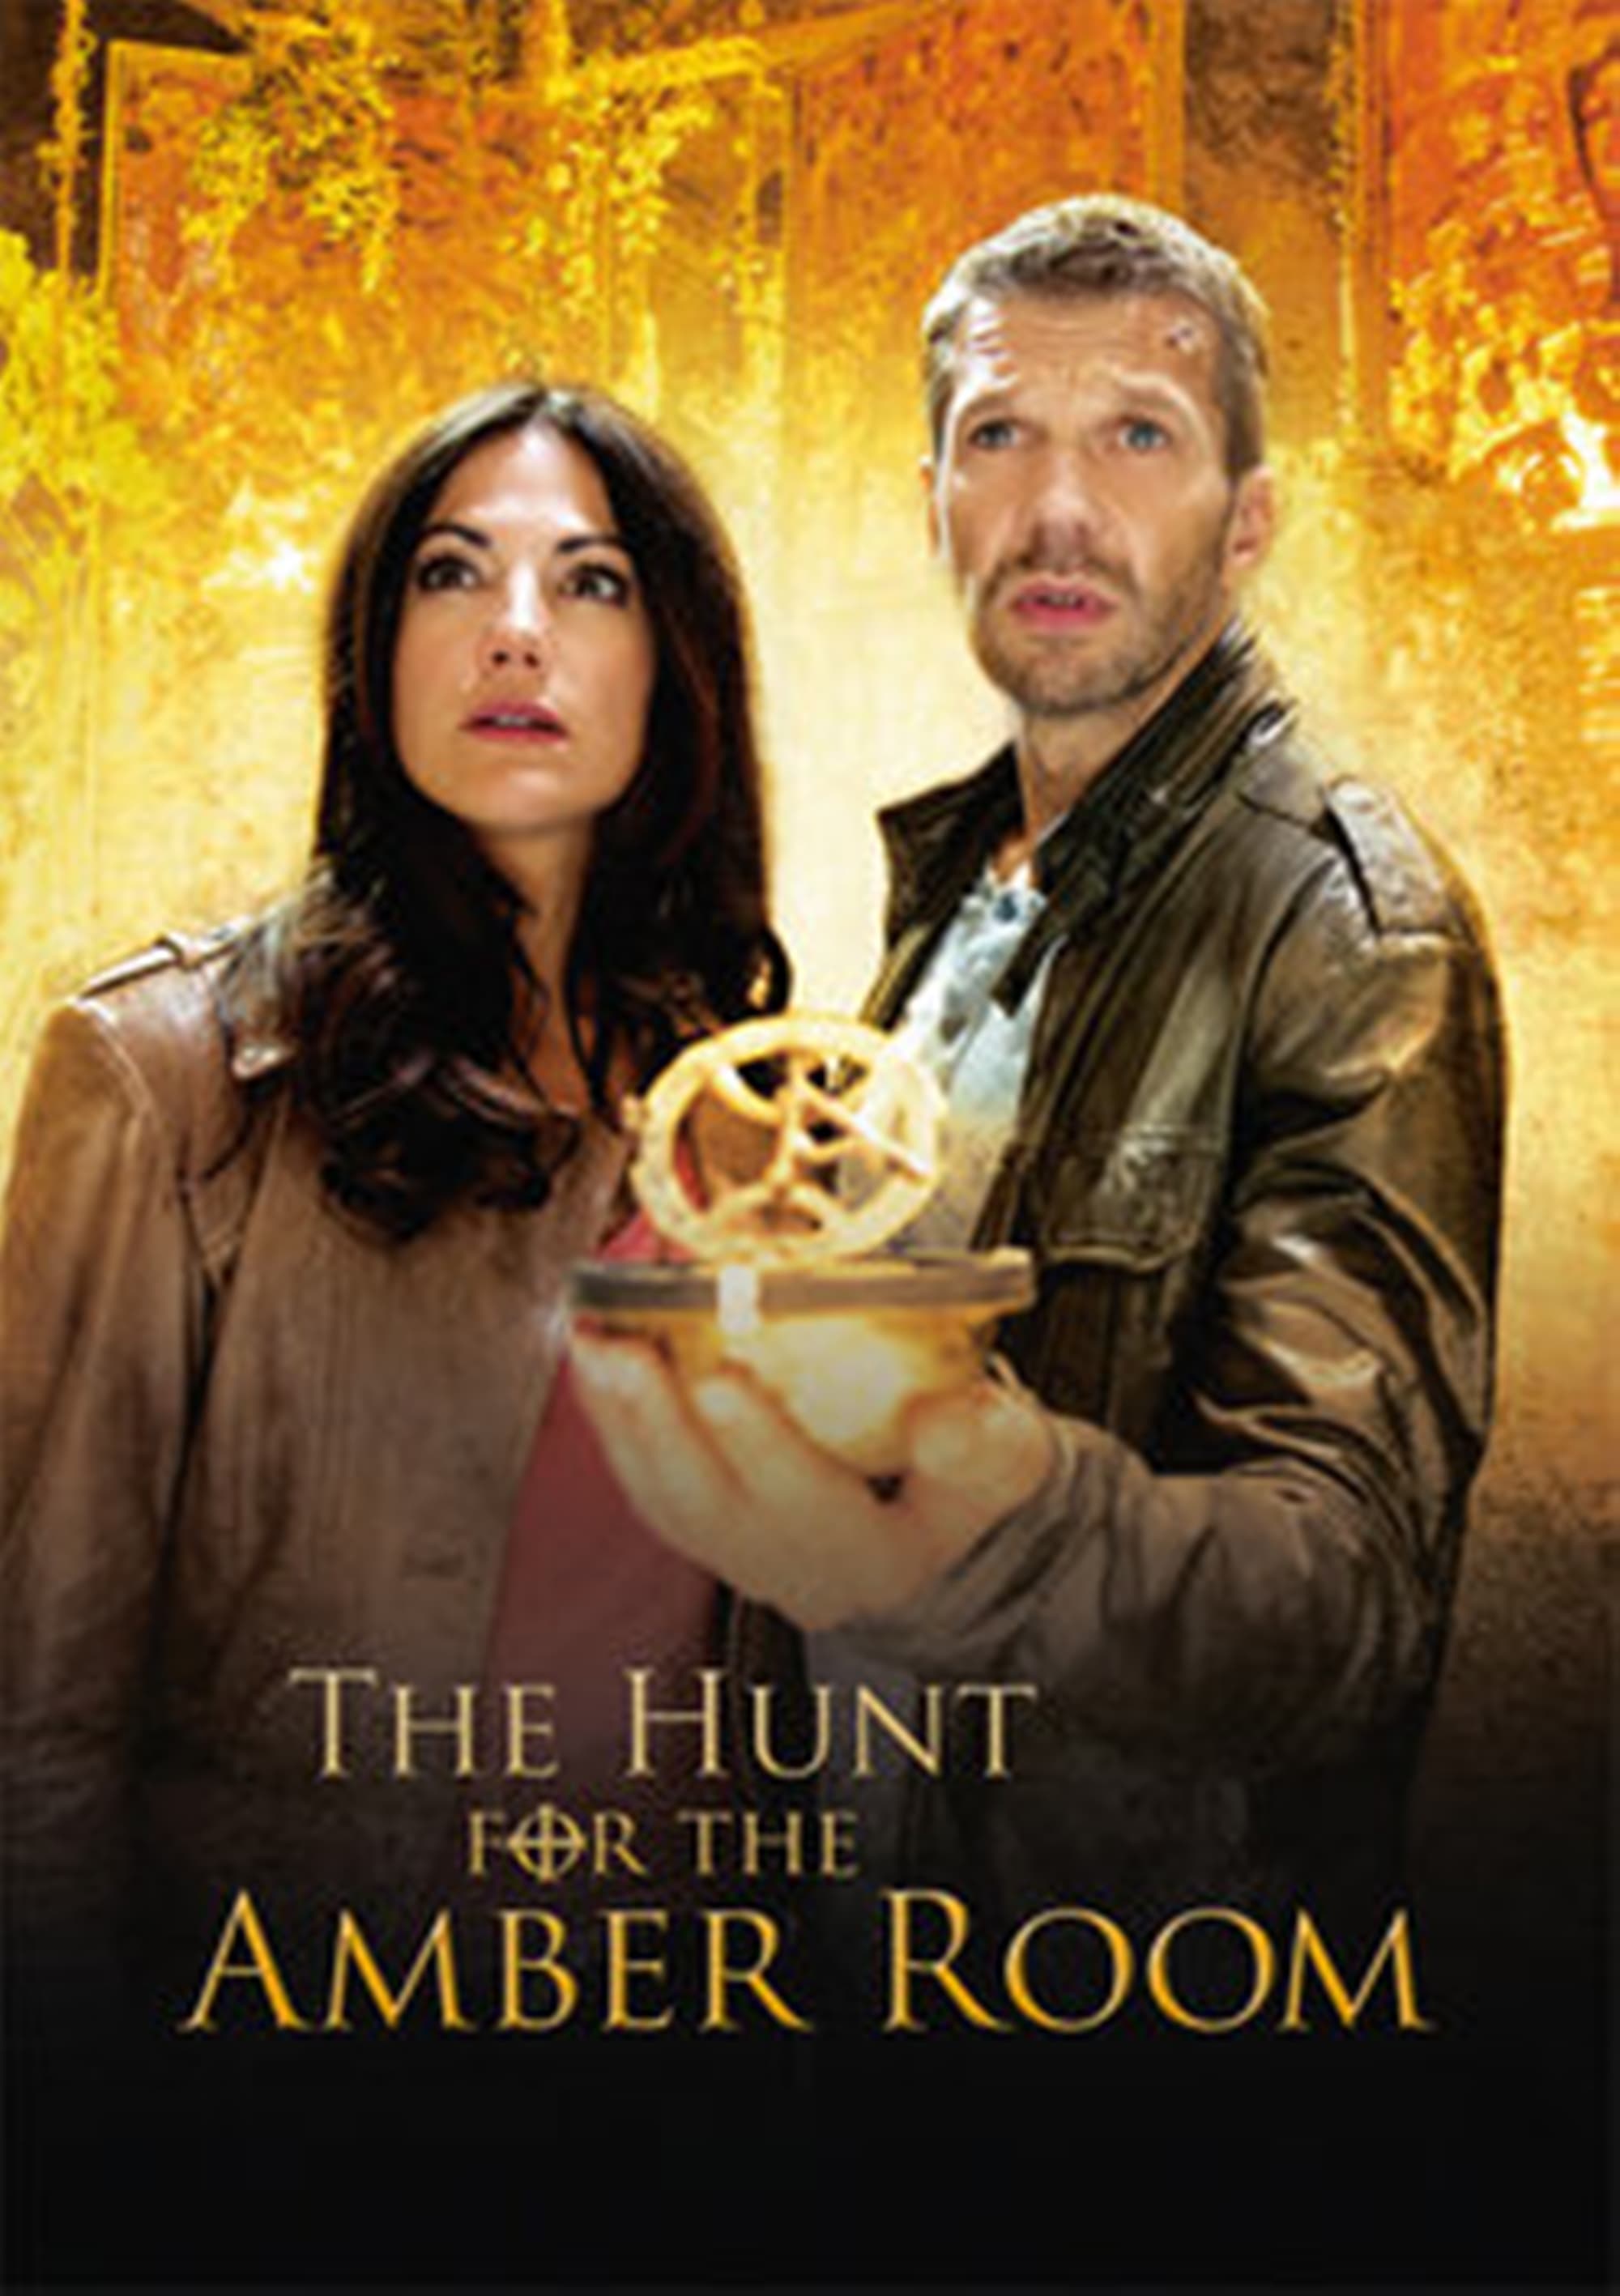 The Hunt for the Amber Room